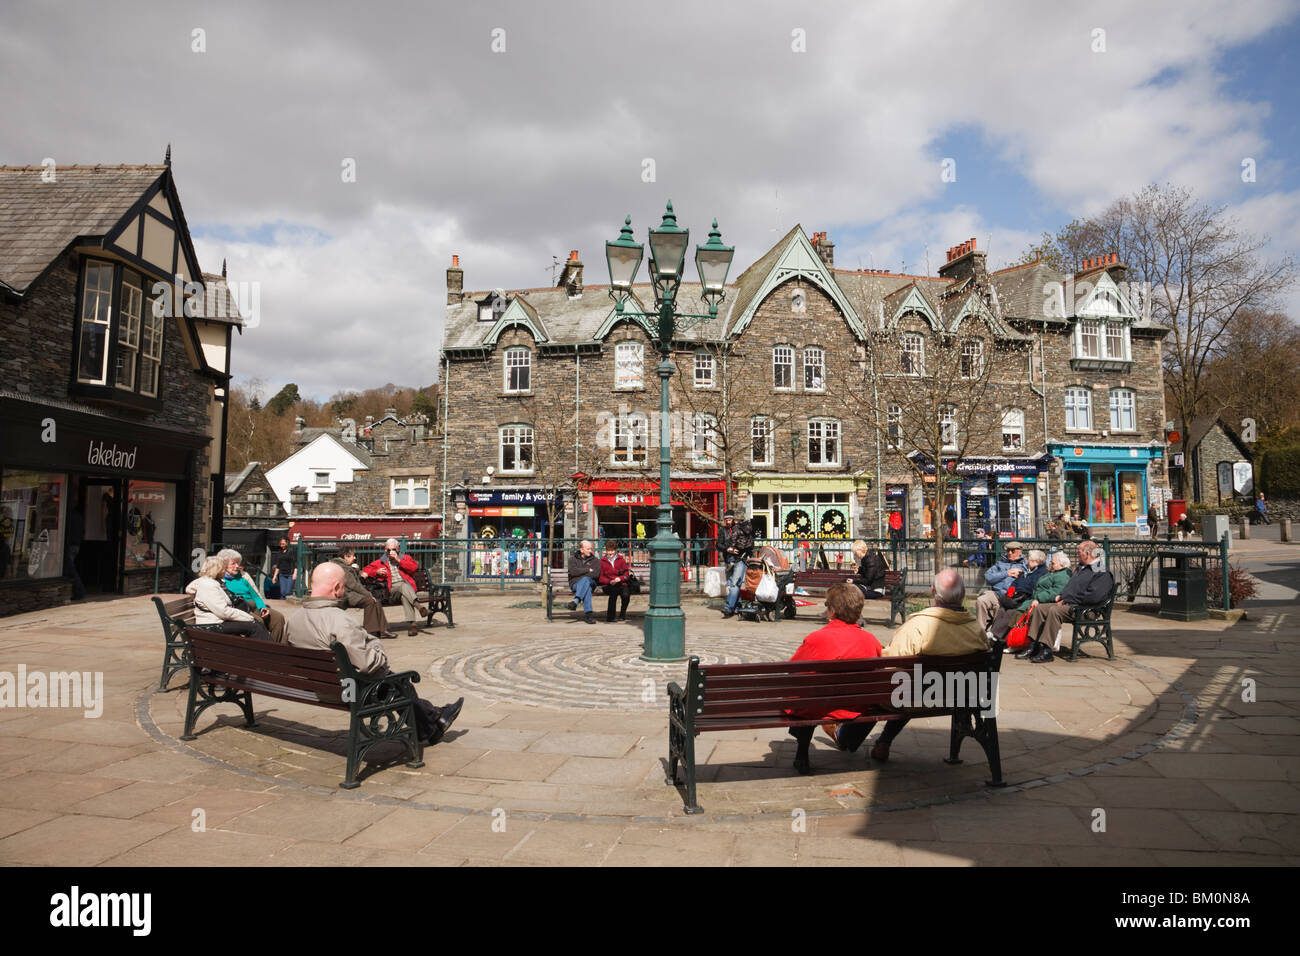 People sitting in the town square in Market Cross, Ambleside, Cumbria, England, UK, Britain Stock Photo